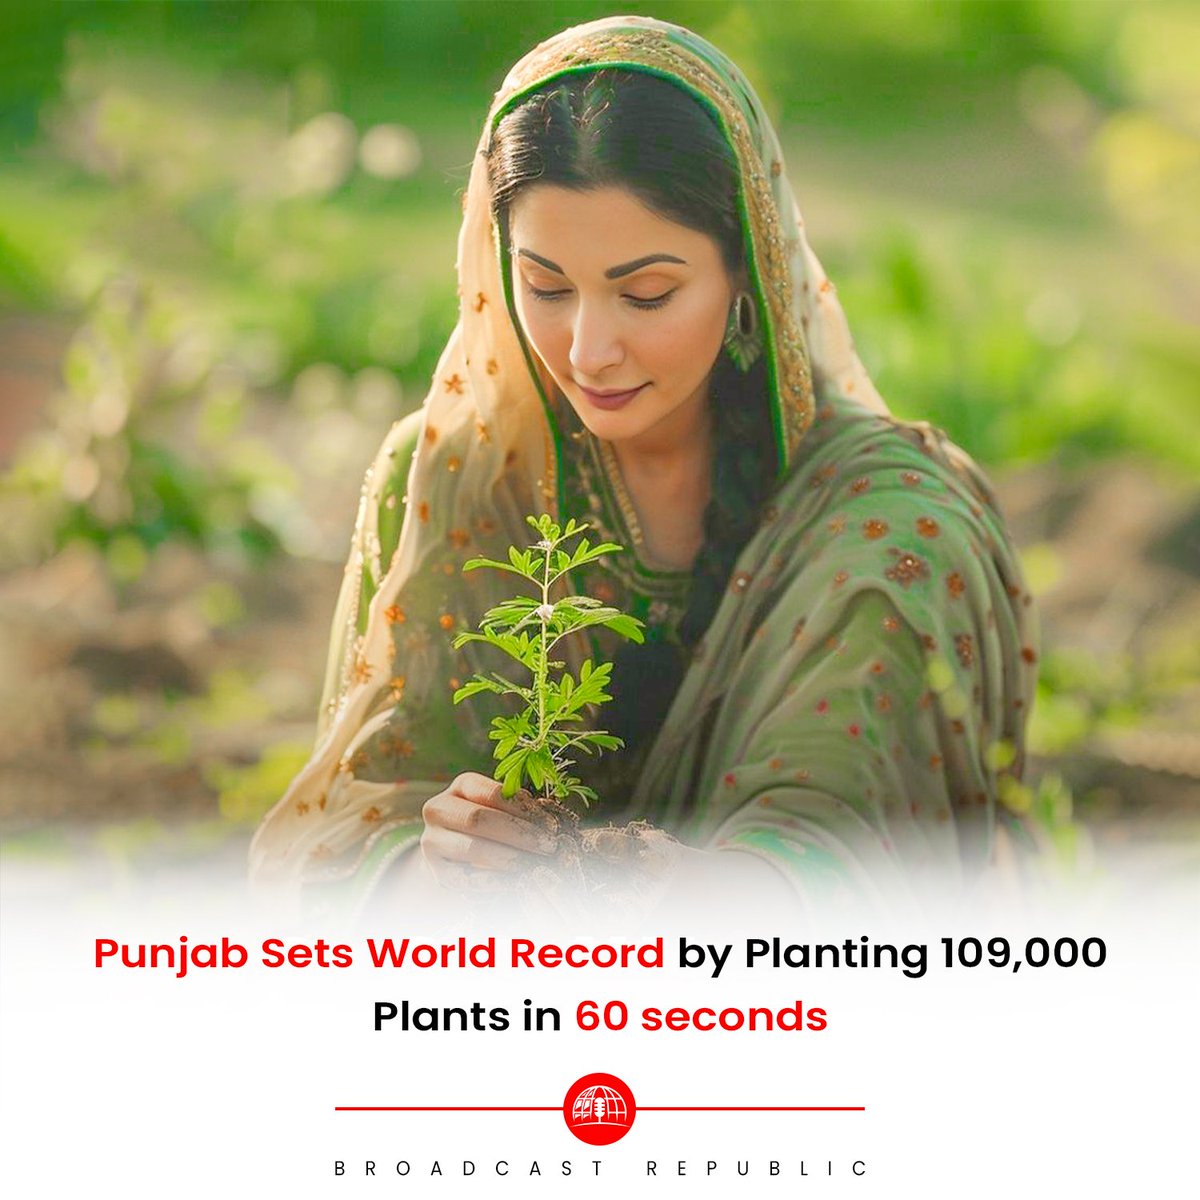 Under the leadership of Chief Minister Punjab Maryam Nawaz, the 'Plant For Pakistan' campaign has set a remarkable milestone in environmental conservation. 

#PlantForPakistan #EnvironmentalConservation #PunjabAchievement #GreenInitiatives